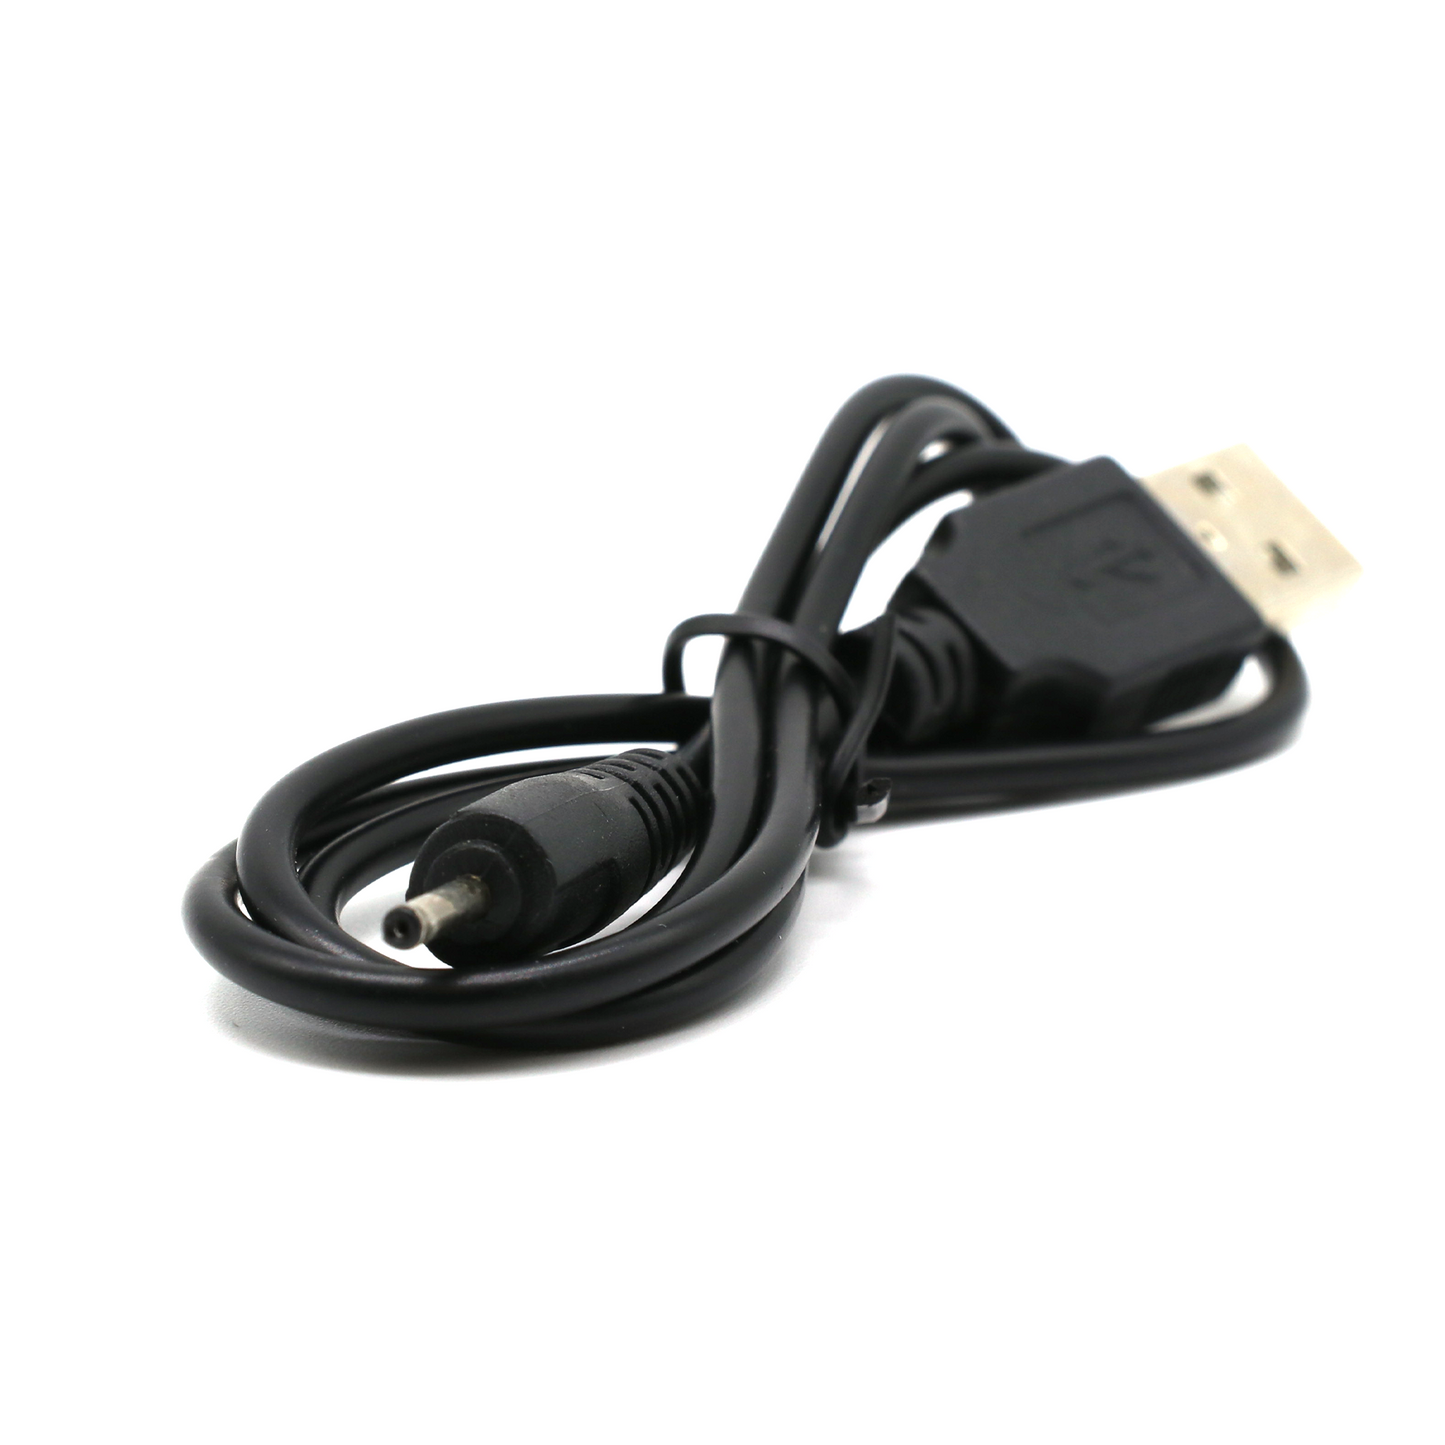 Round Shape Plugin Pin USB Charging Cord for HiLight P3X or P3XL